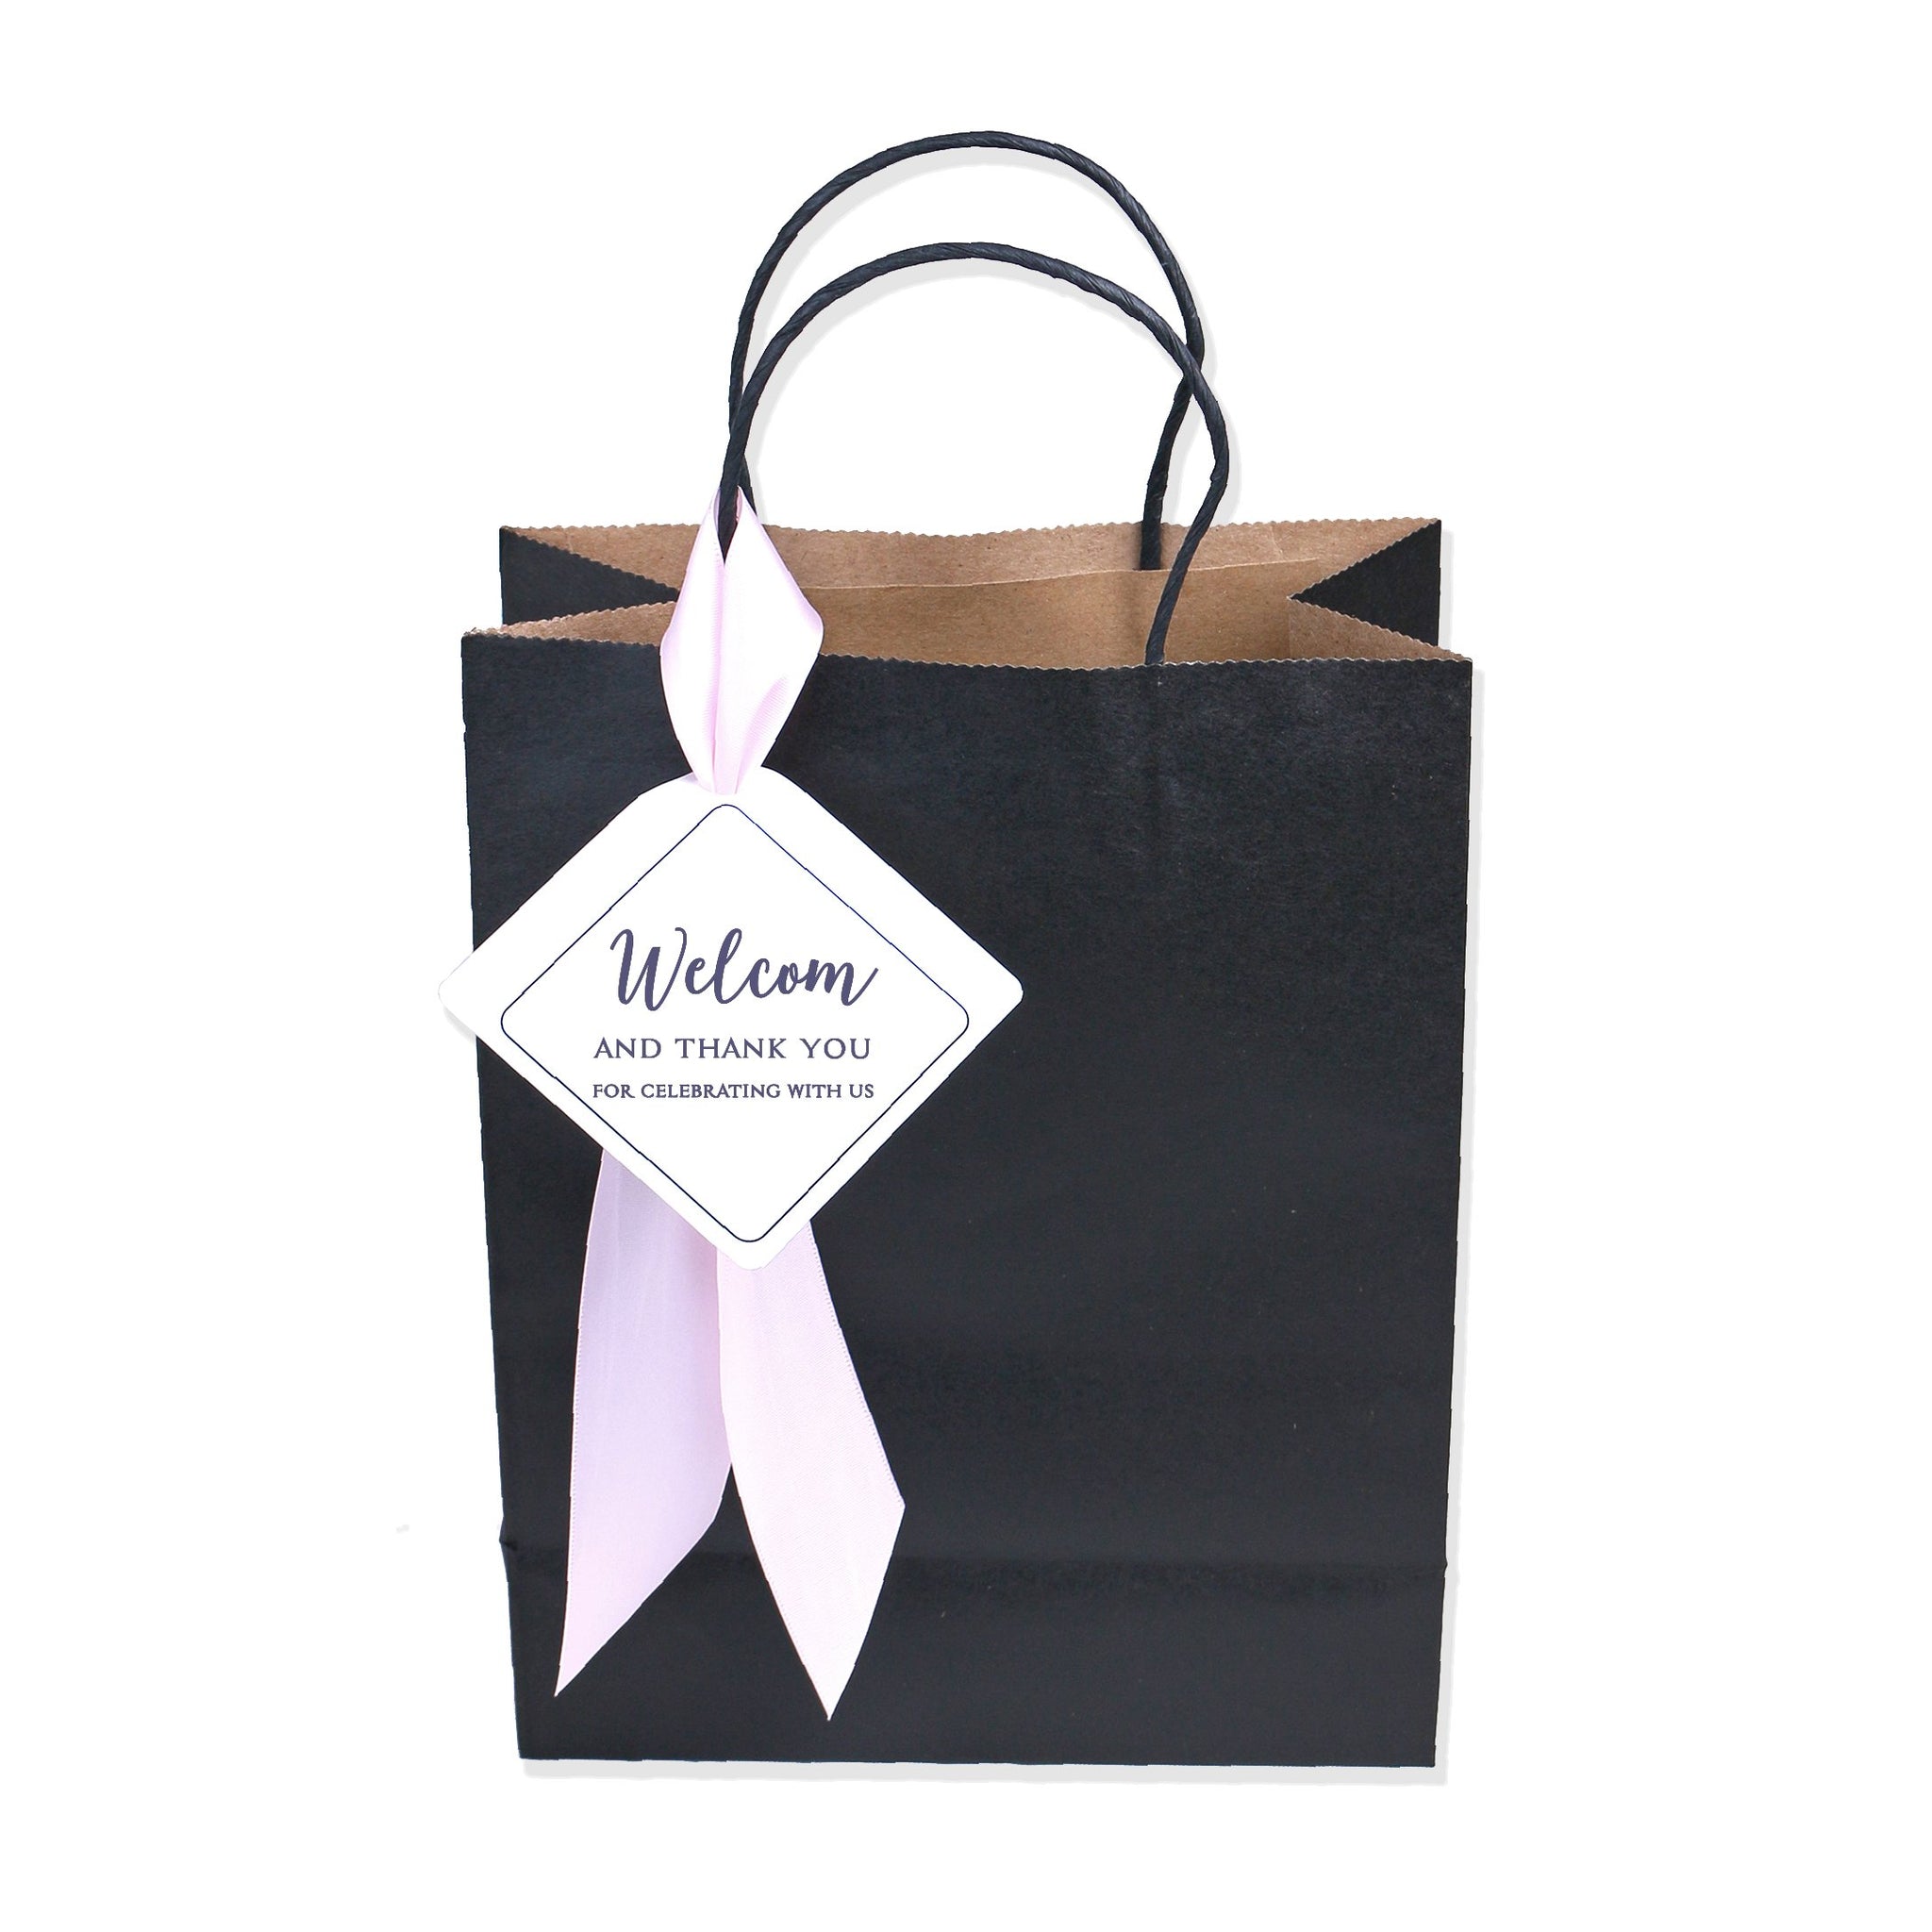 Purple & Gold Wedding Welcome Bags With Satin Ribbon Handles